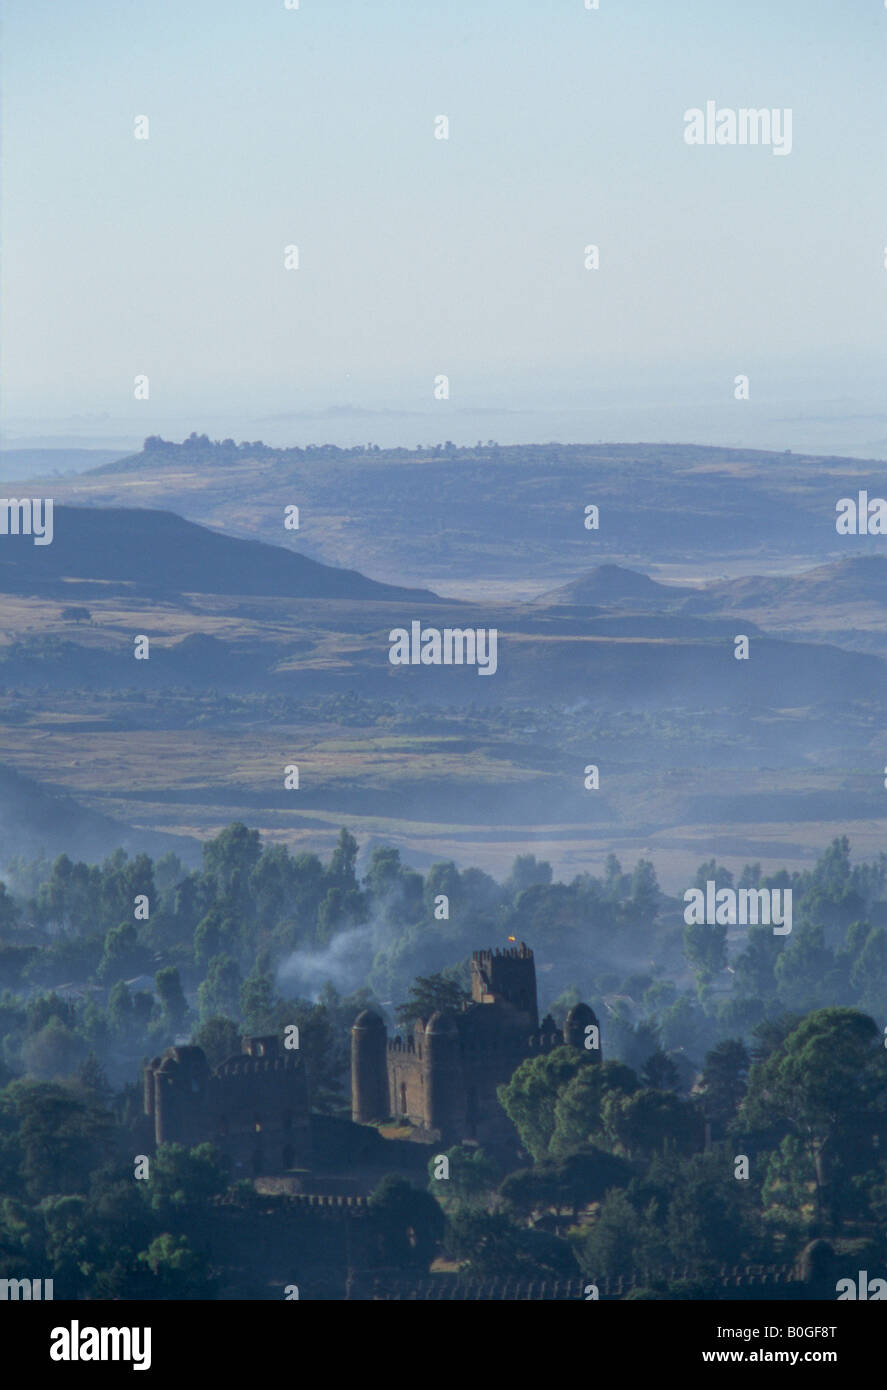 King Fasil's castle and surrounding hills and woods at dawn, Gonder, Ethiopia. Stock Photo